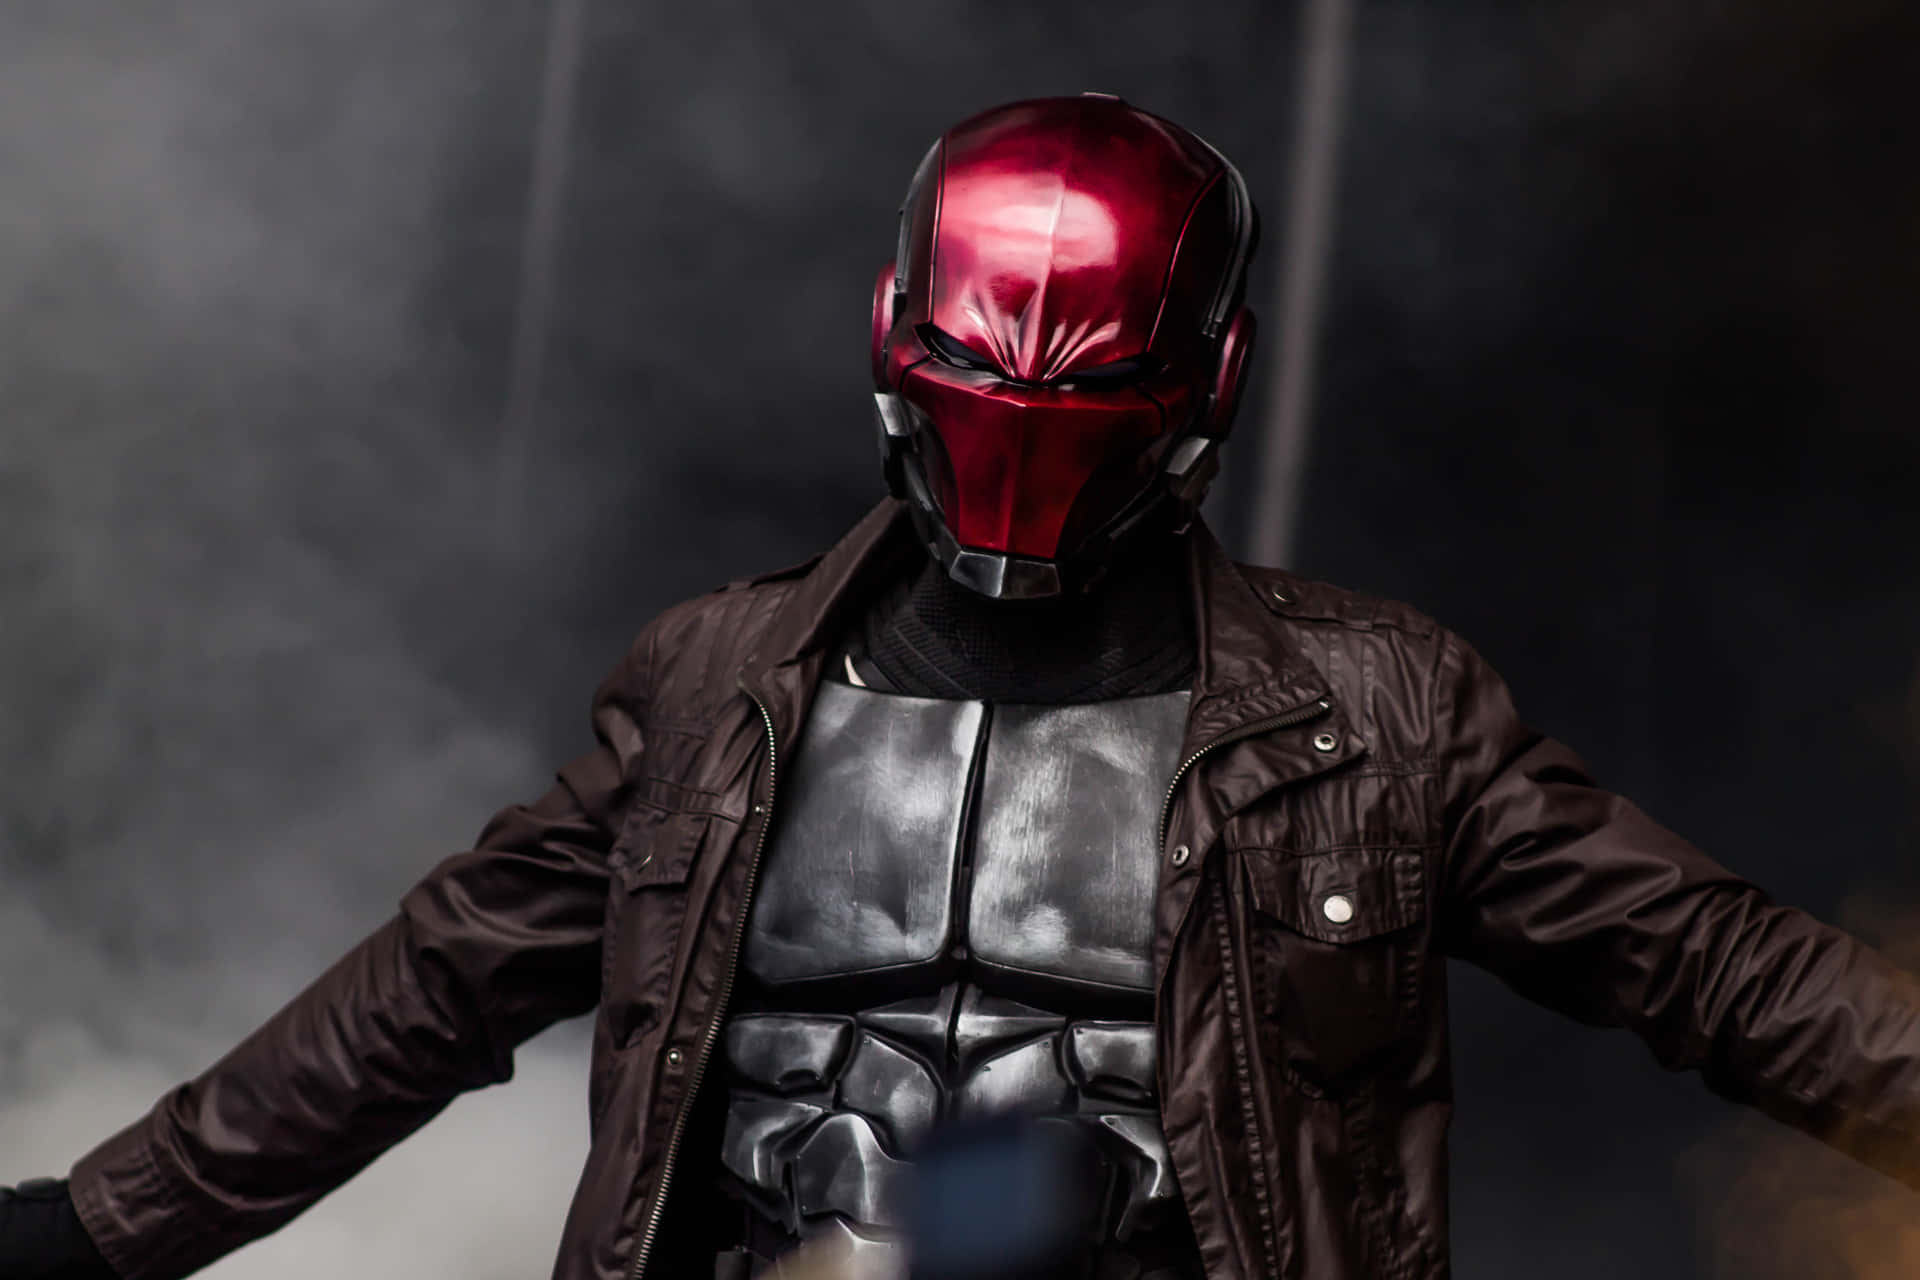 The Red Hood – Becoming a Hero